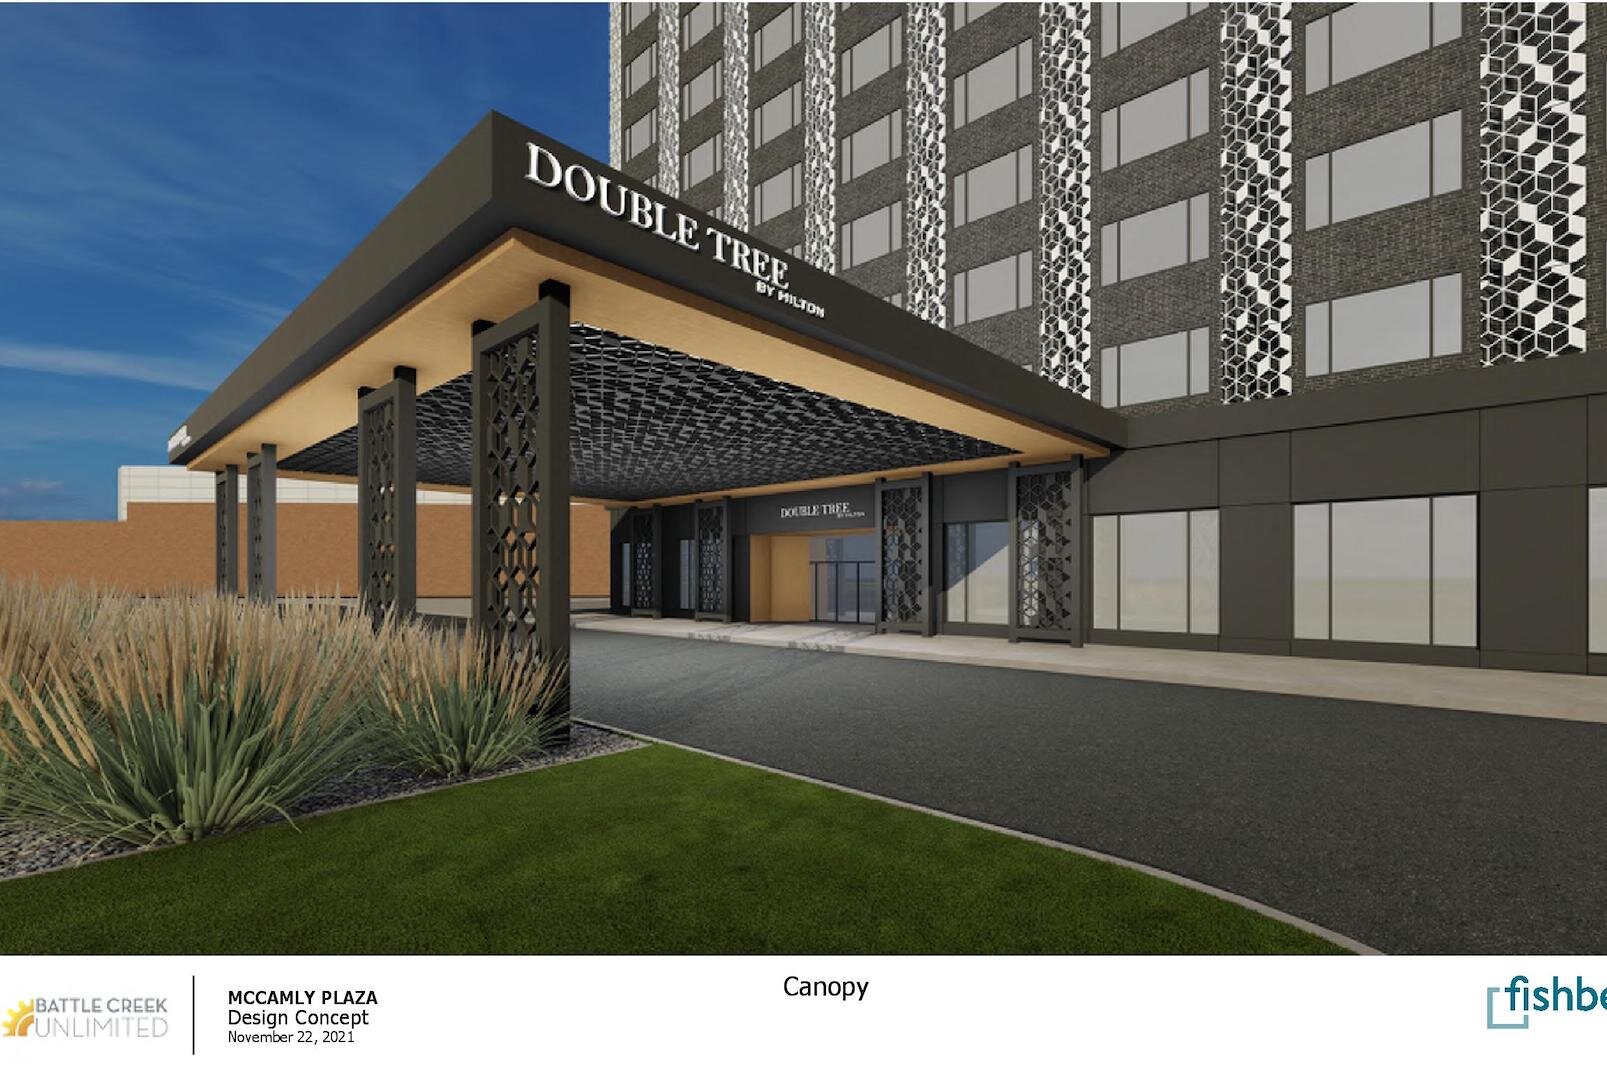 The drive up canopy at the Double Tree entrance as shown in a design concept.